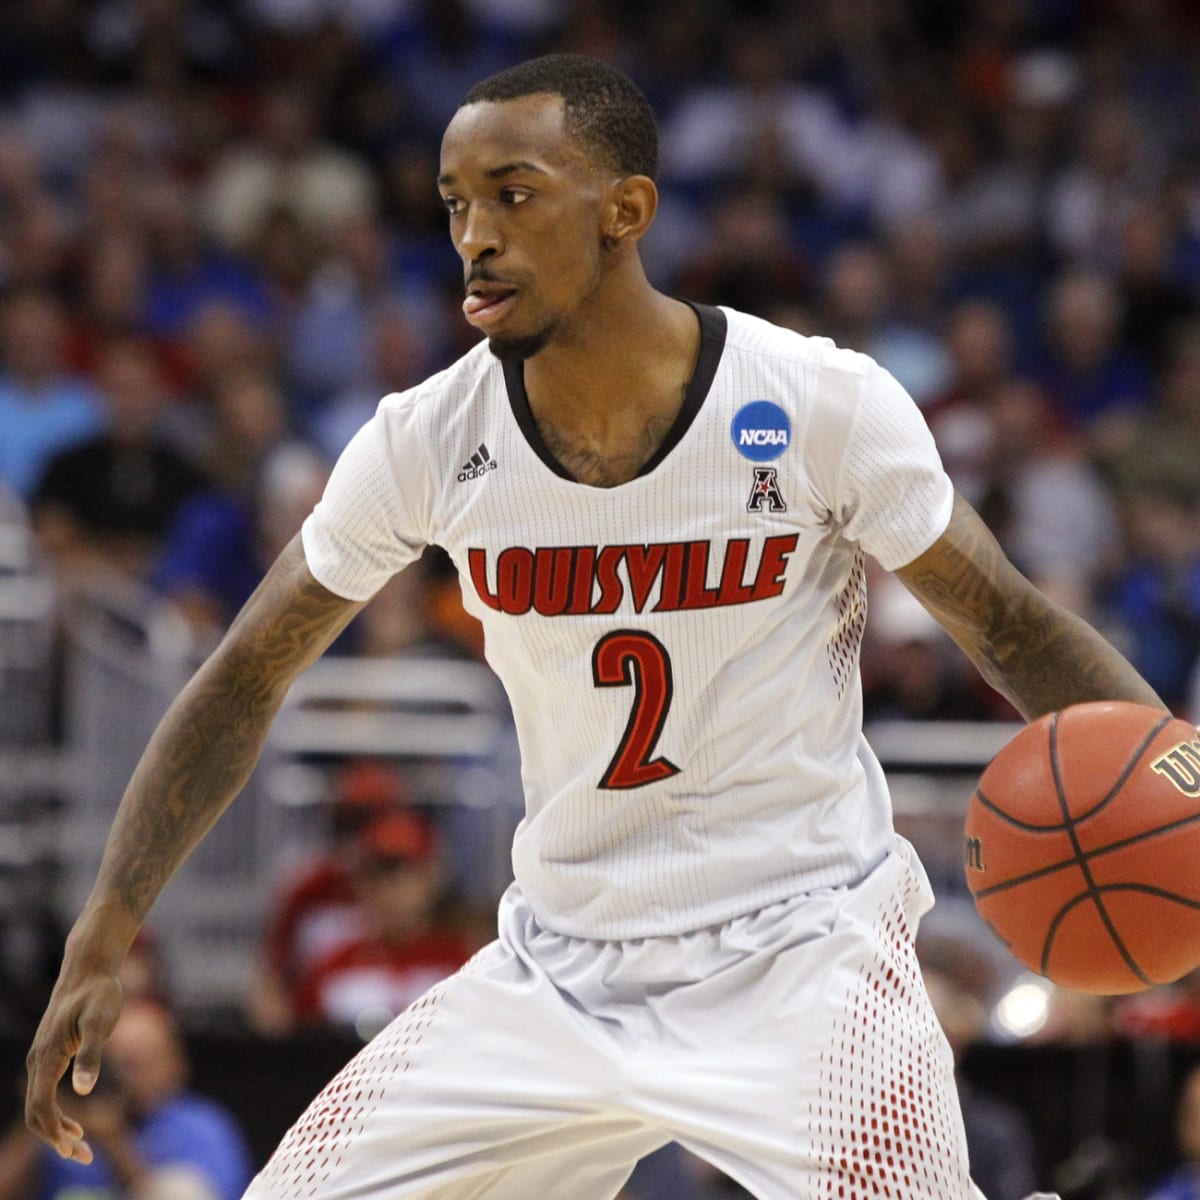 Watch: Russ Smith Gets His No. 2 Jersey Retired - Sports